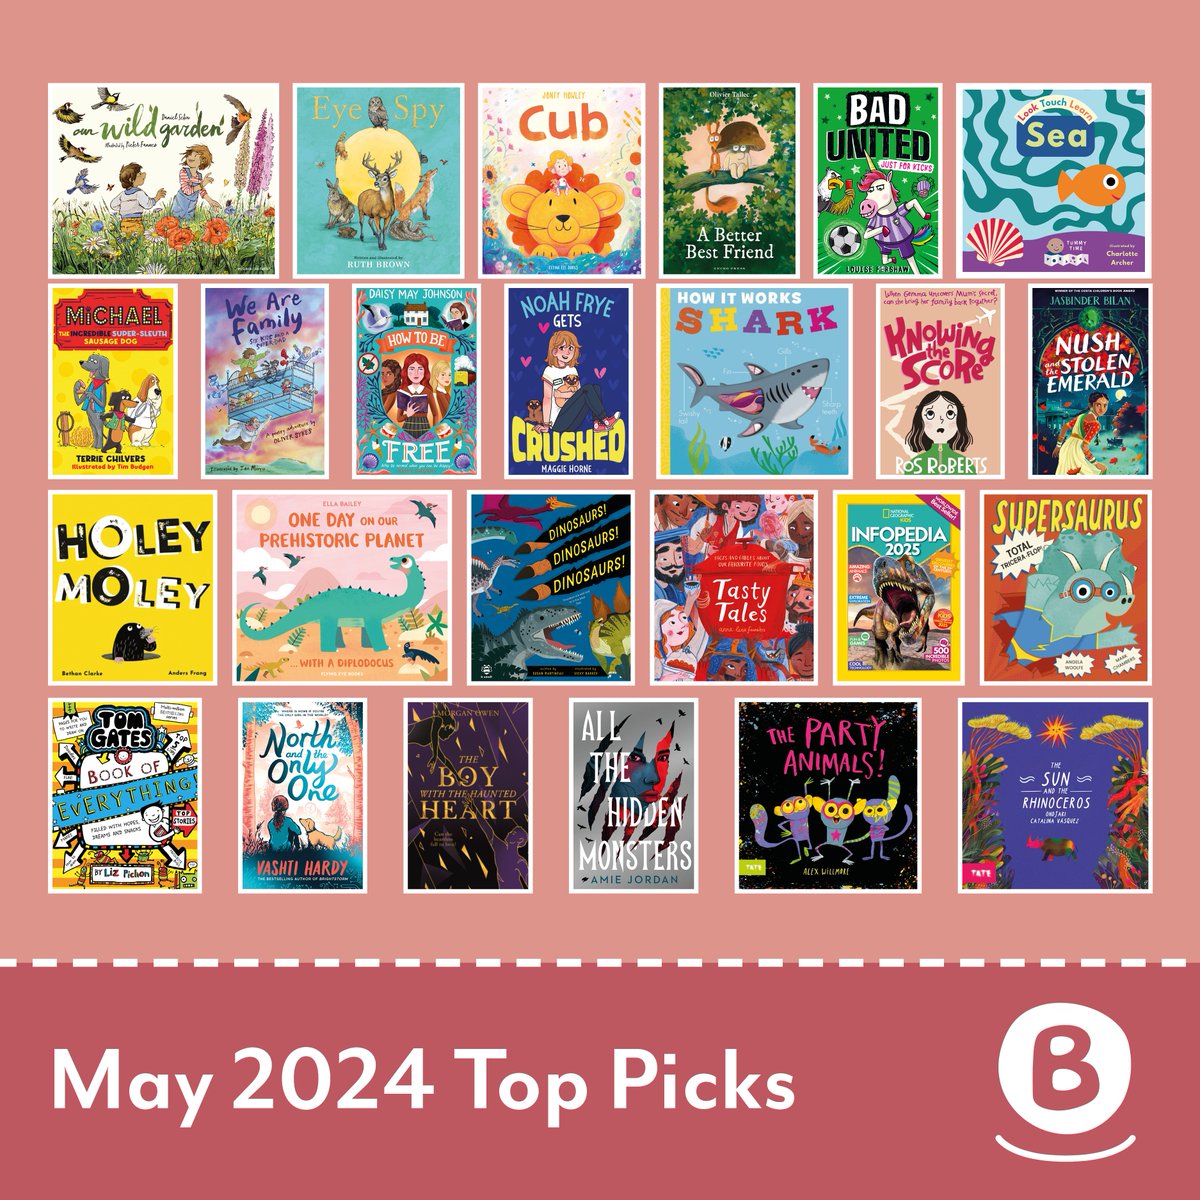 May is not far off and these are the May Top Picks. If you would like more information please ask your Bounce REP. #TopPicks #ChooseBookshops #May #NewBooks